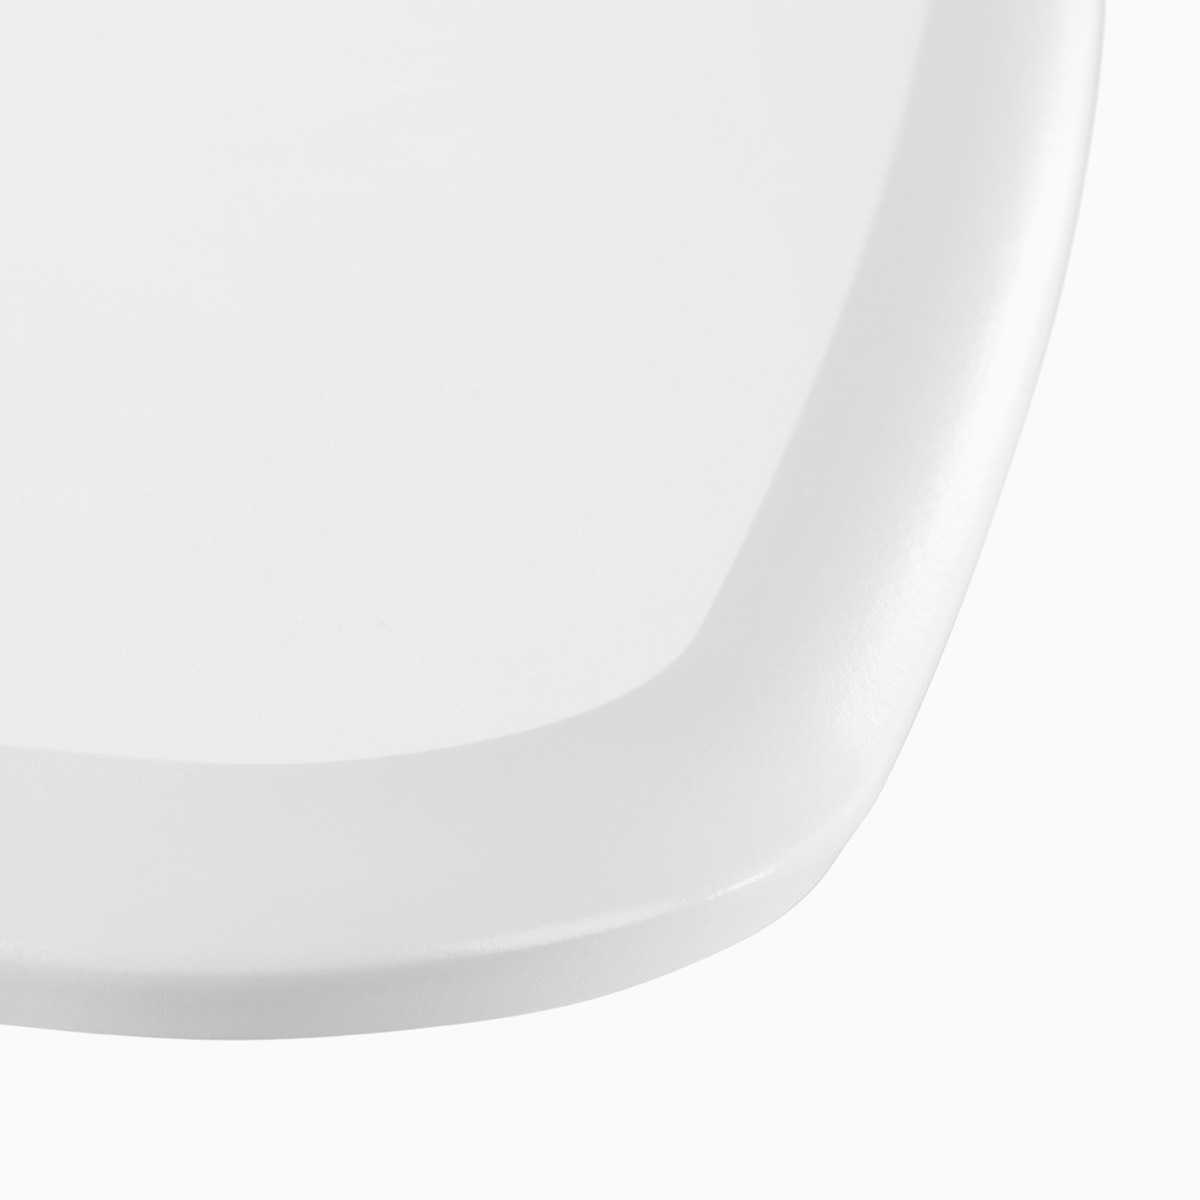 A close-up view of the surface edge of an Intent Solution's mobile table in a white laminate finish.